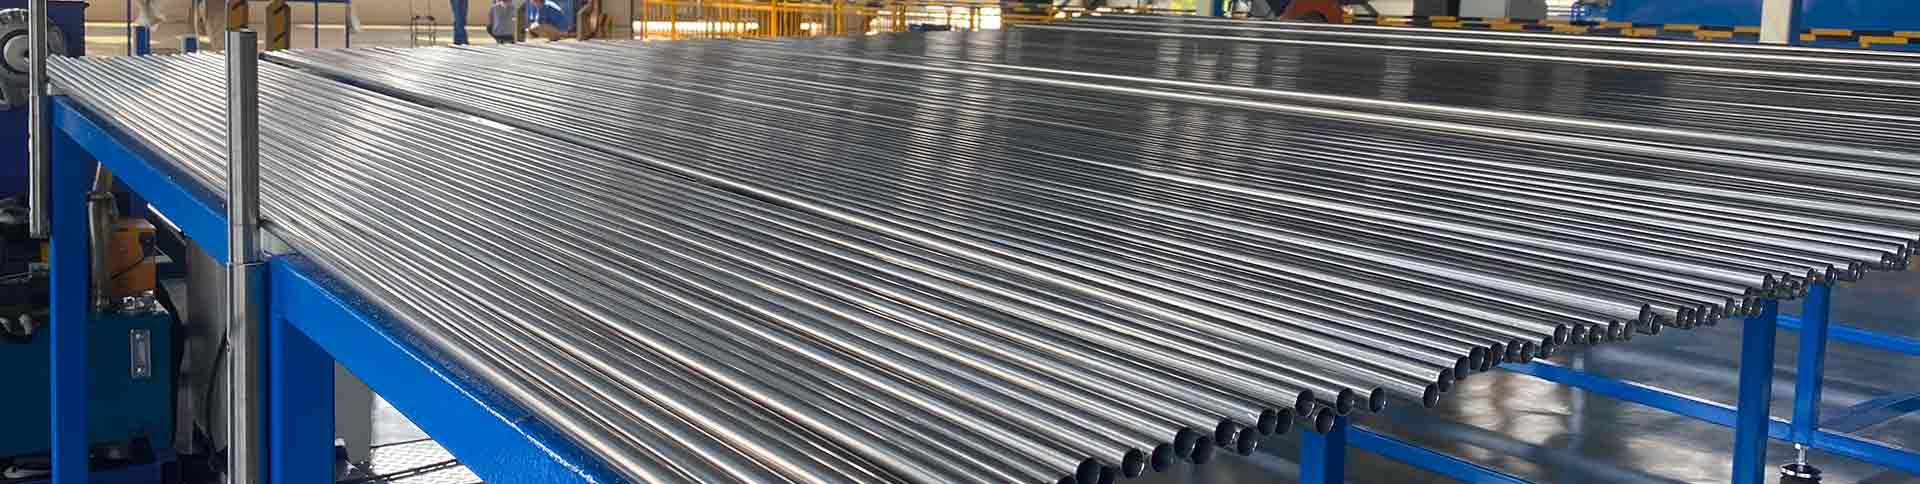 YUHONG GROUP Recent Orders of Low Finned Tube A179 Carbon Steel